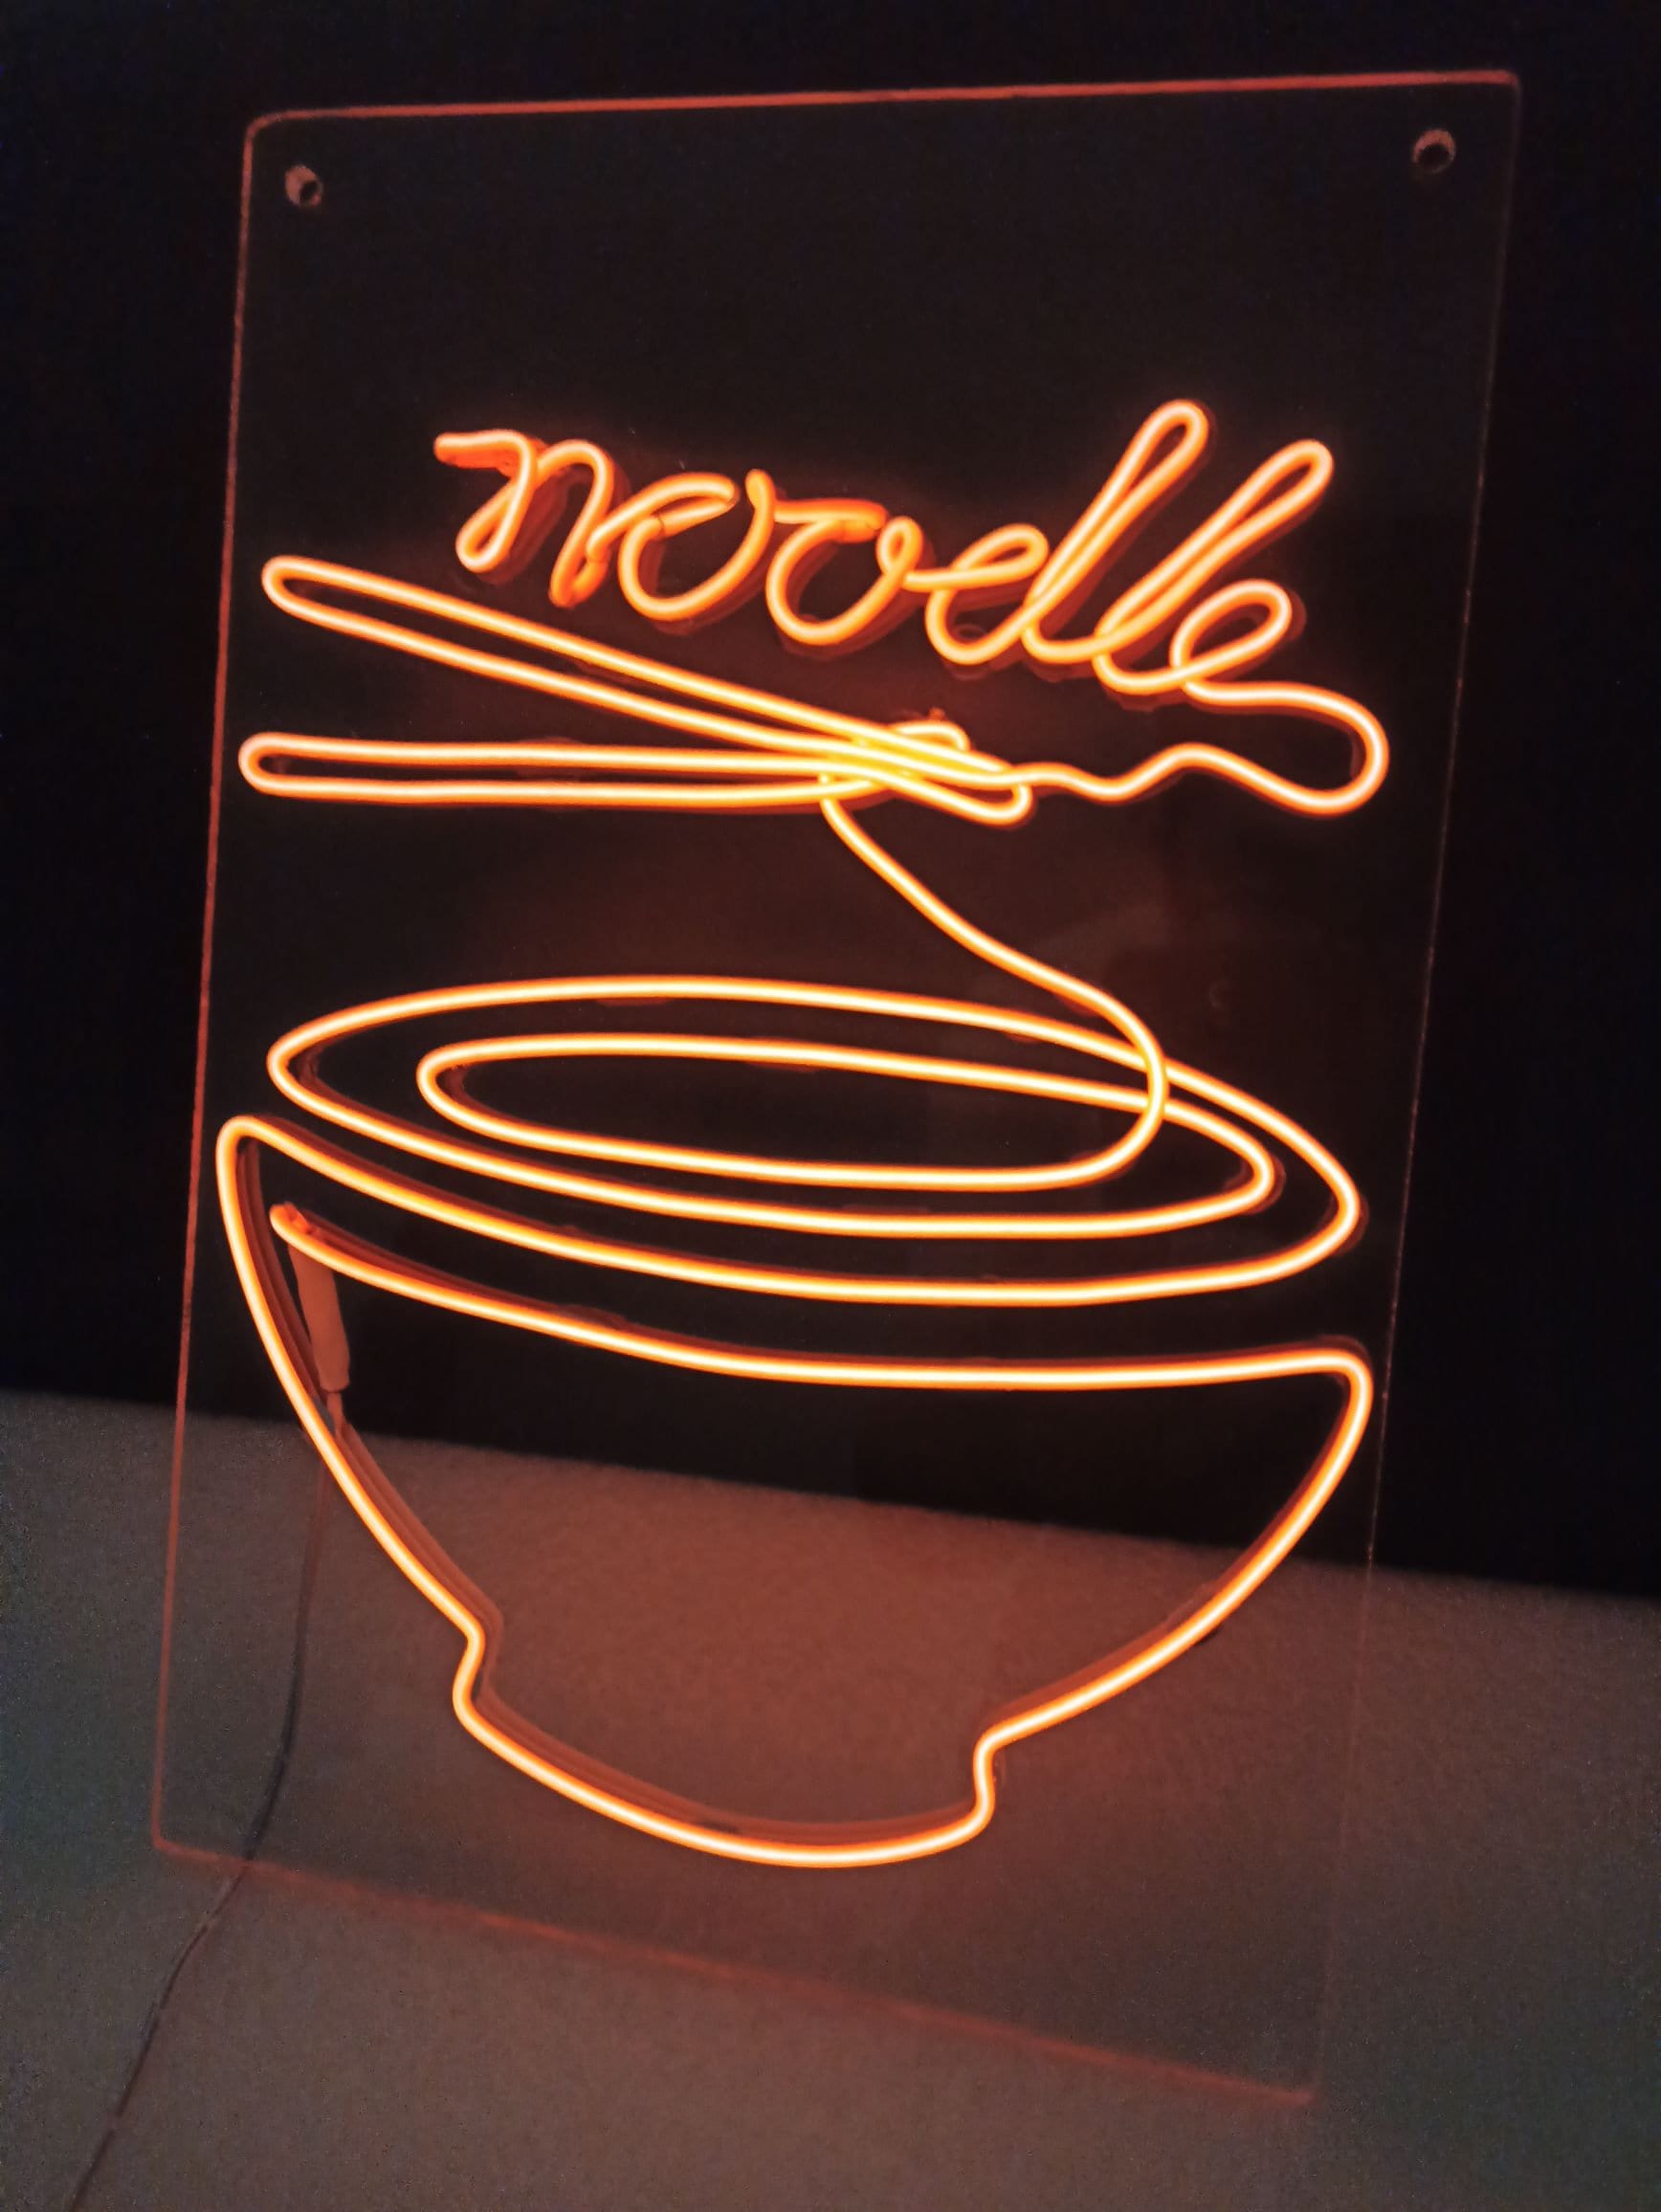 A neon sign of a bowl of noodles - Neon orange